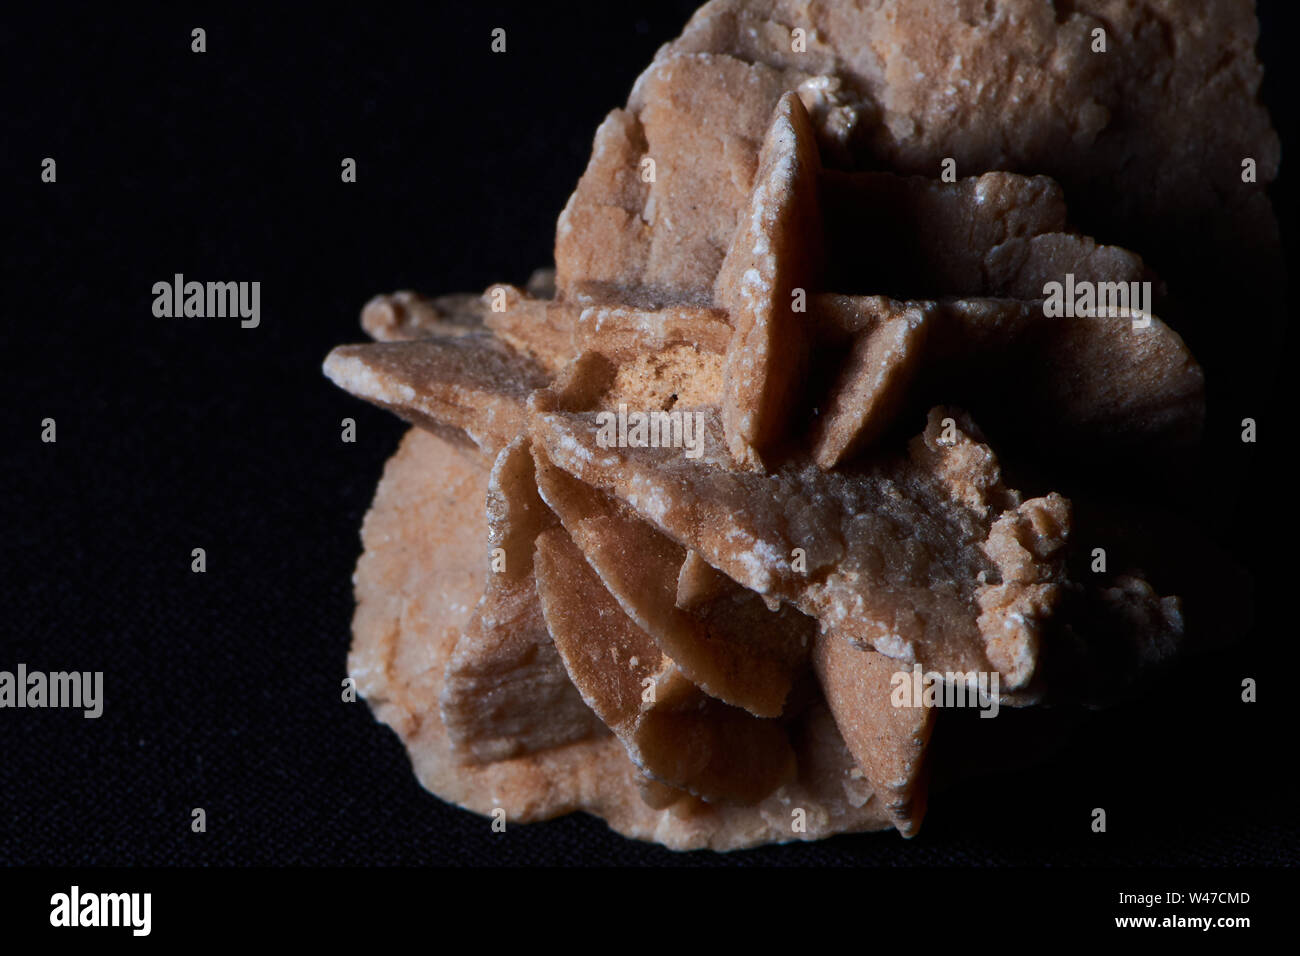 macro color photo of a desert rose on a black background Stock Photo